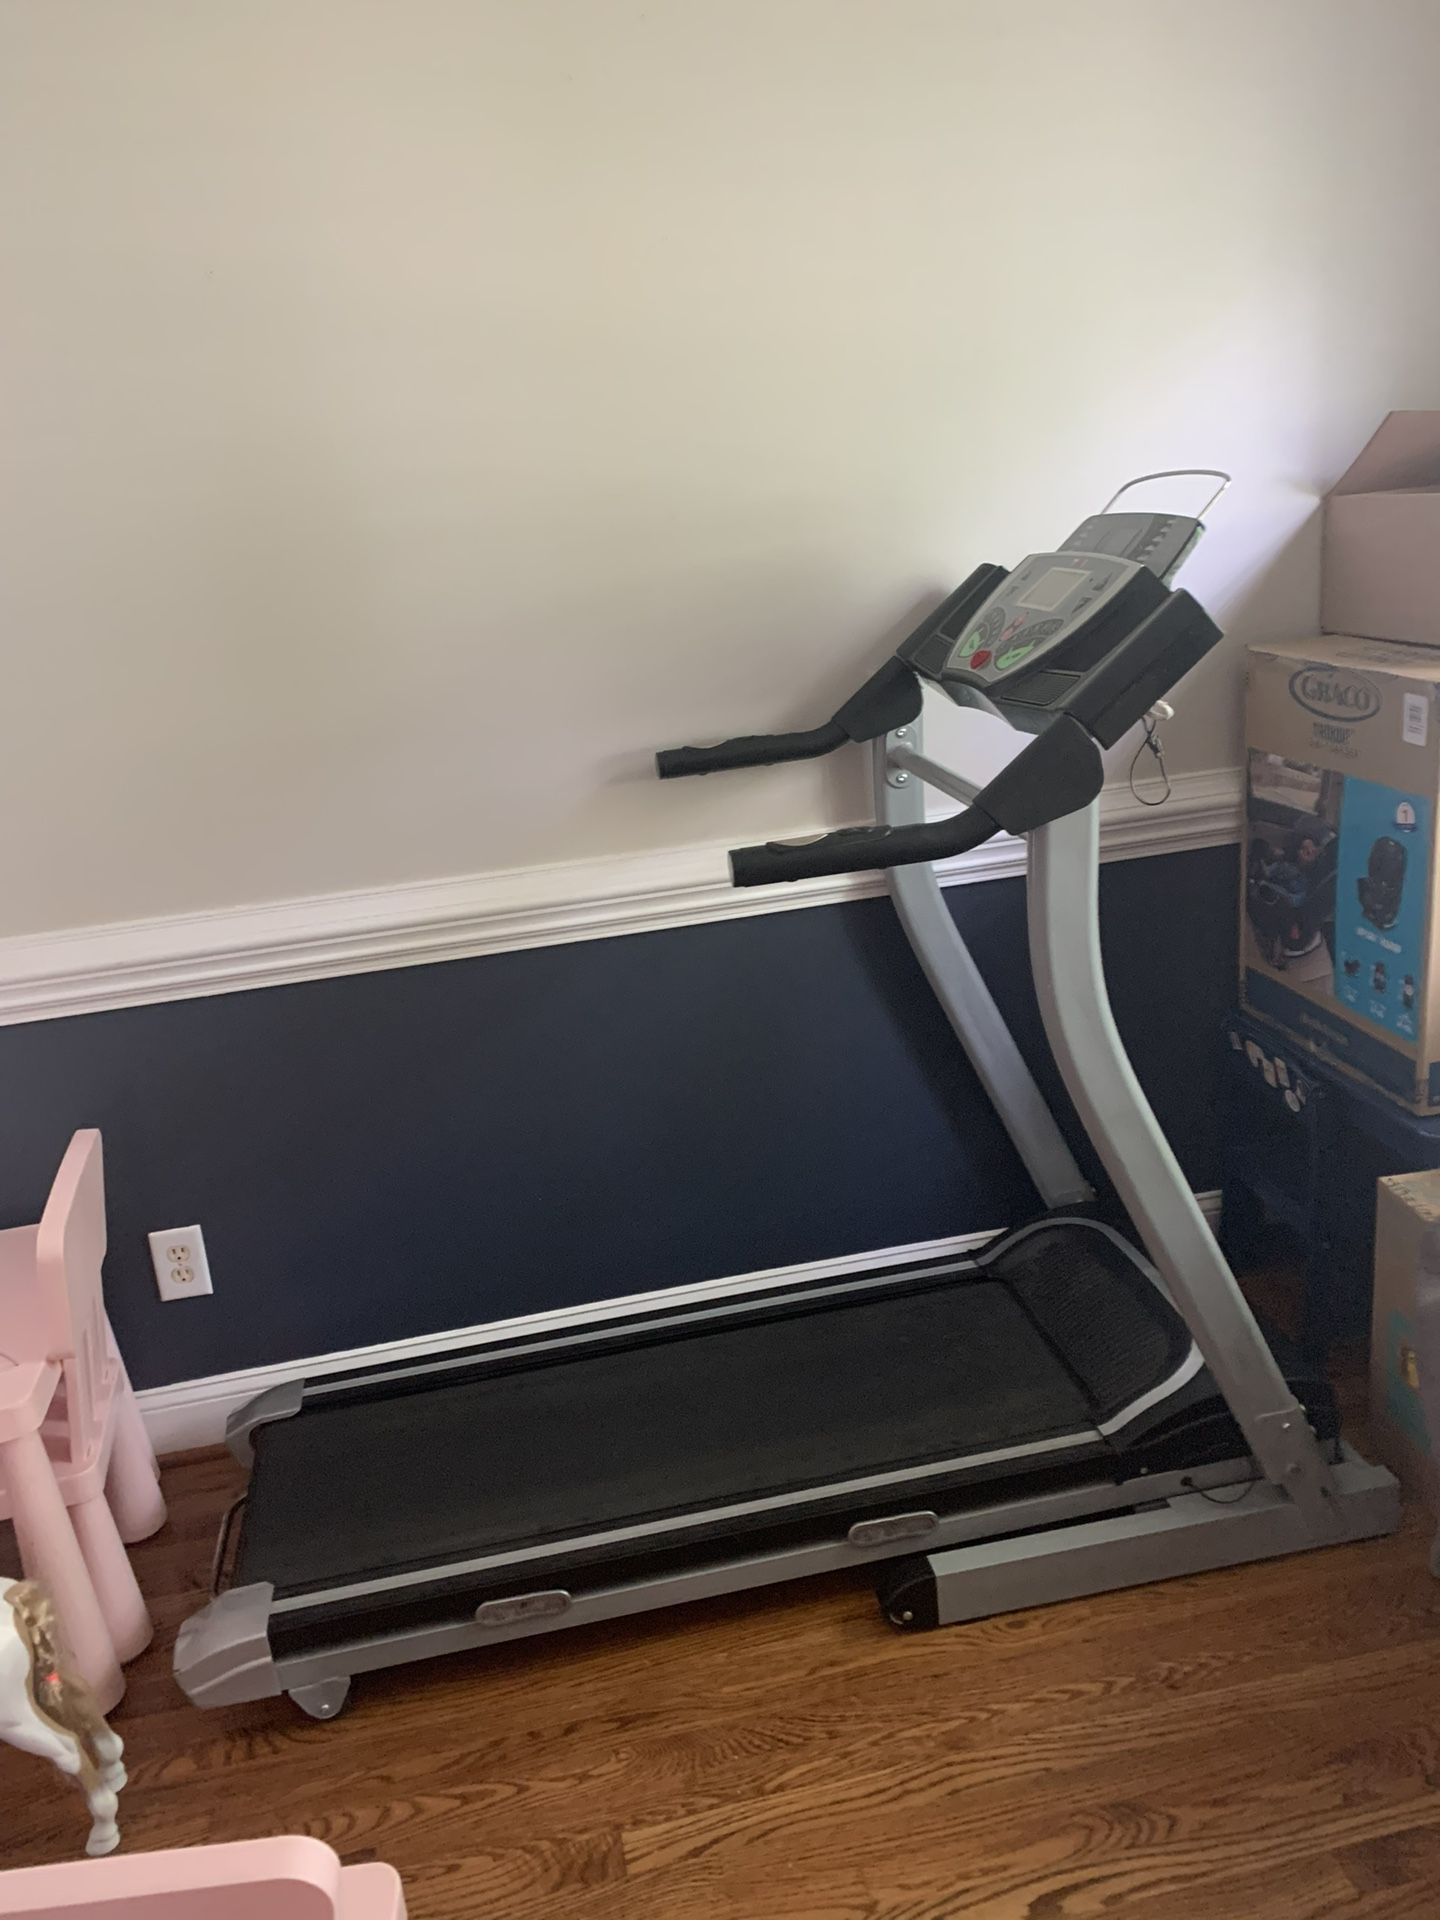 Treadmill. Bought Used 